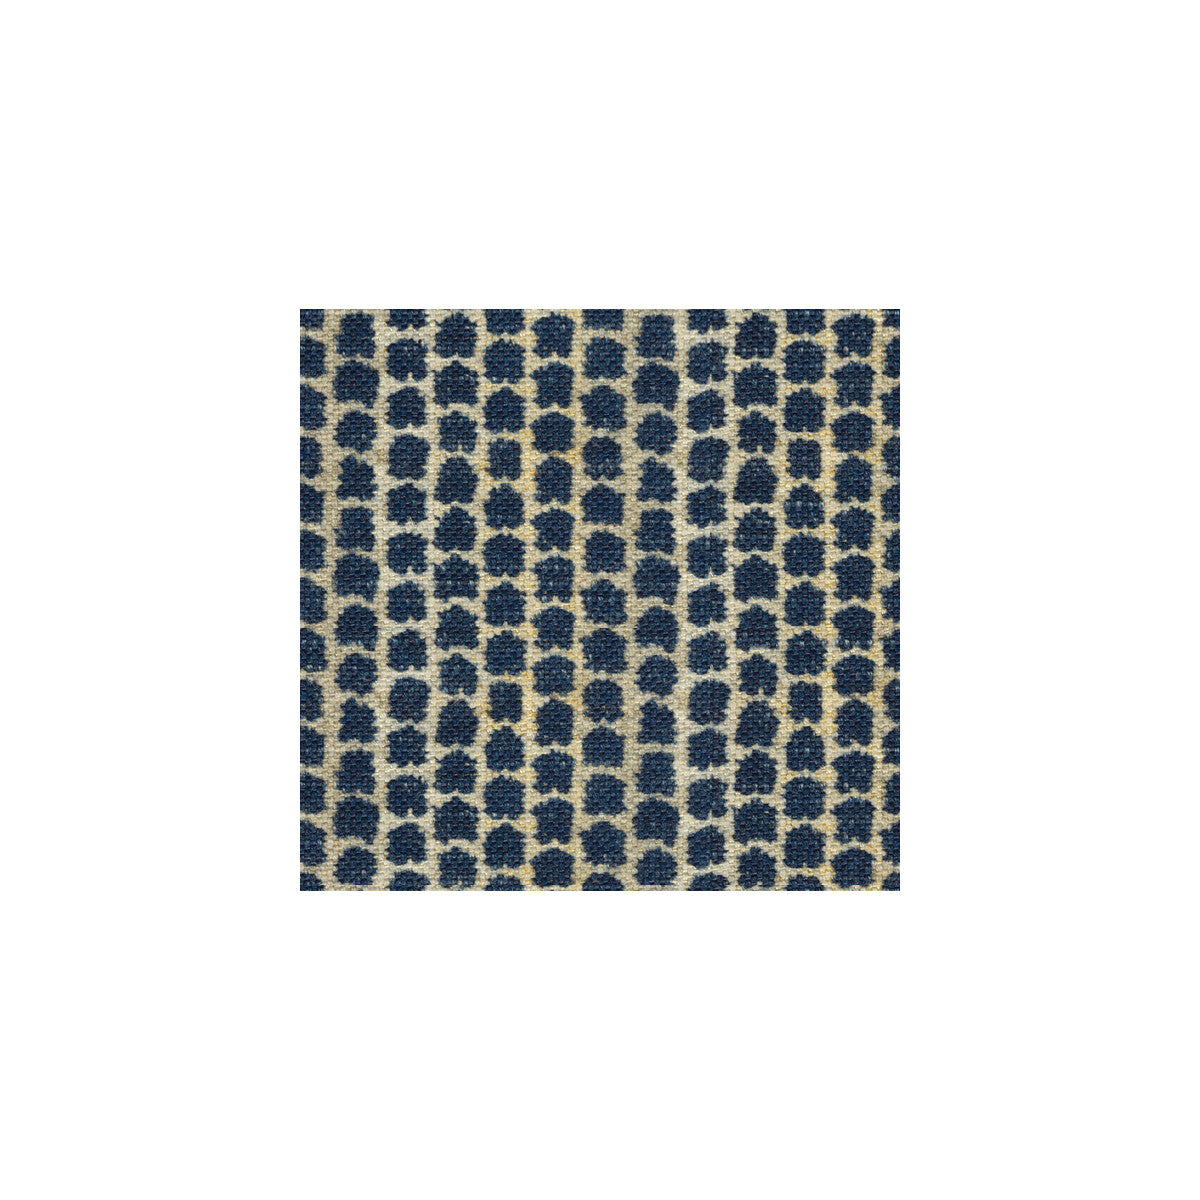 Kaya fabric in indigo color - pattern 2012101.50.0 - by Lee Jofa in the The Malika collection